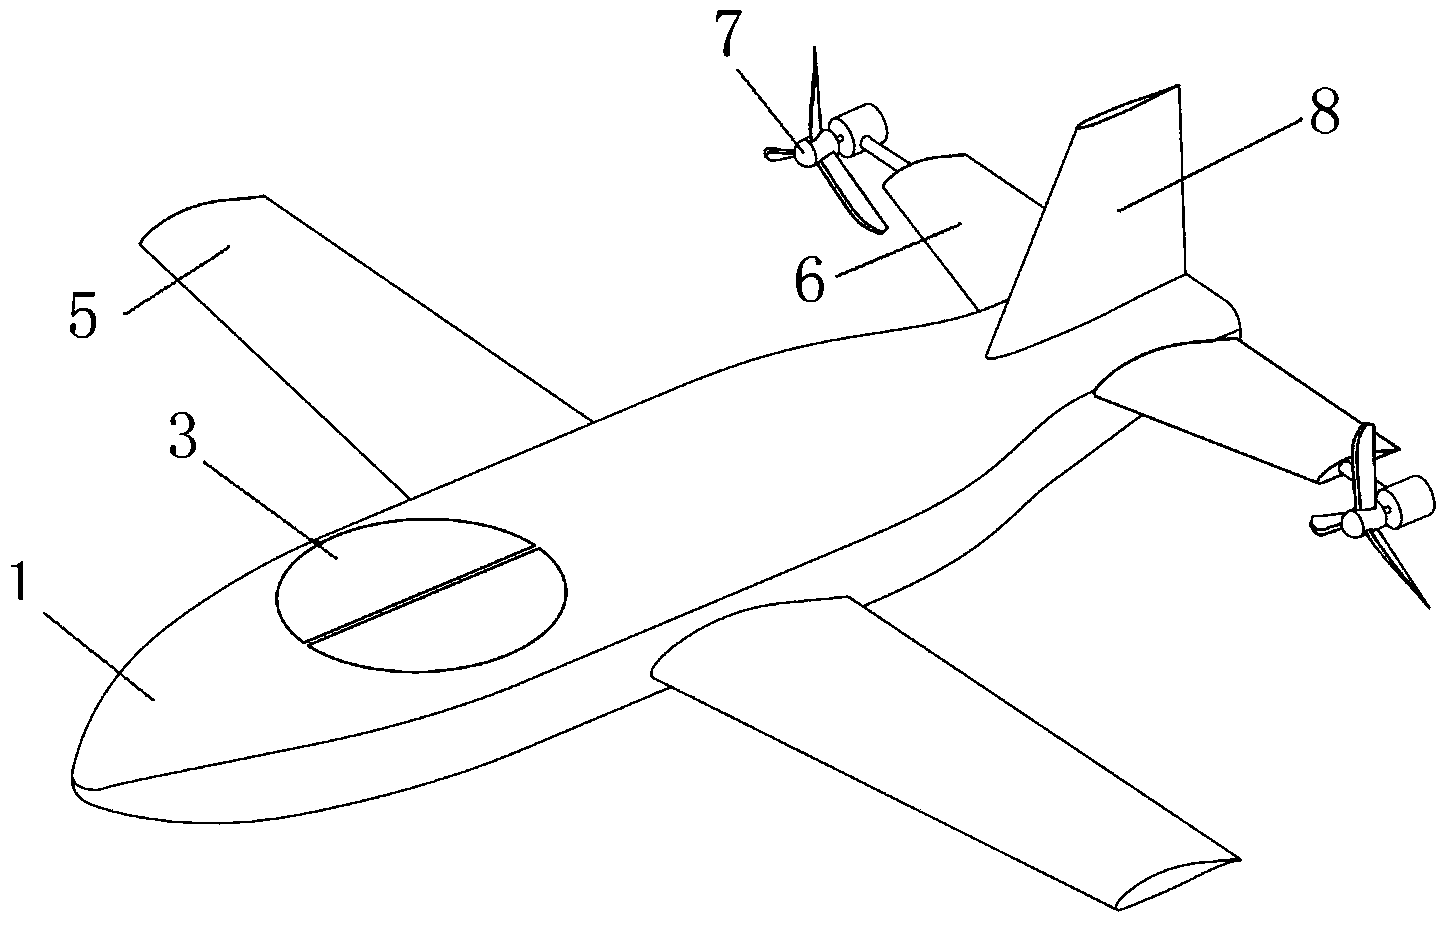 Aircraft capable of vertically taking off and landing at high speed